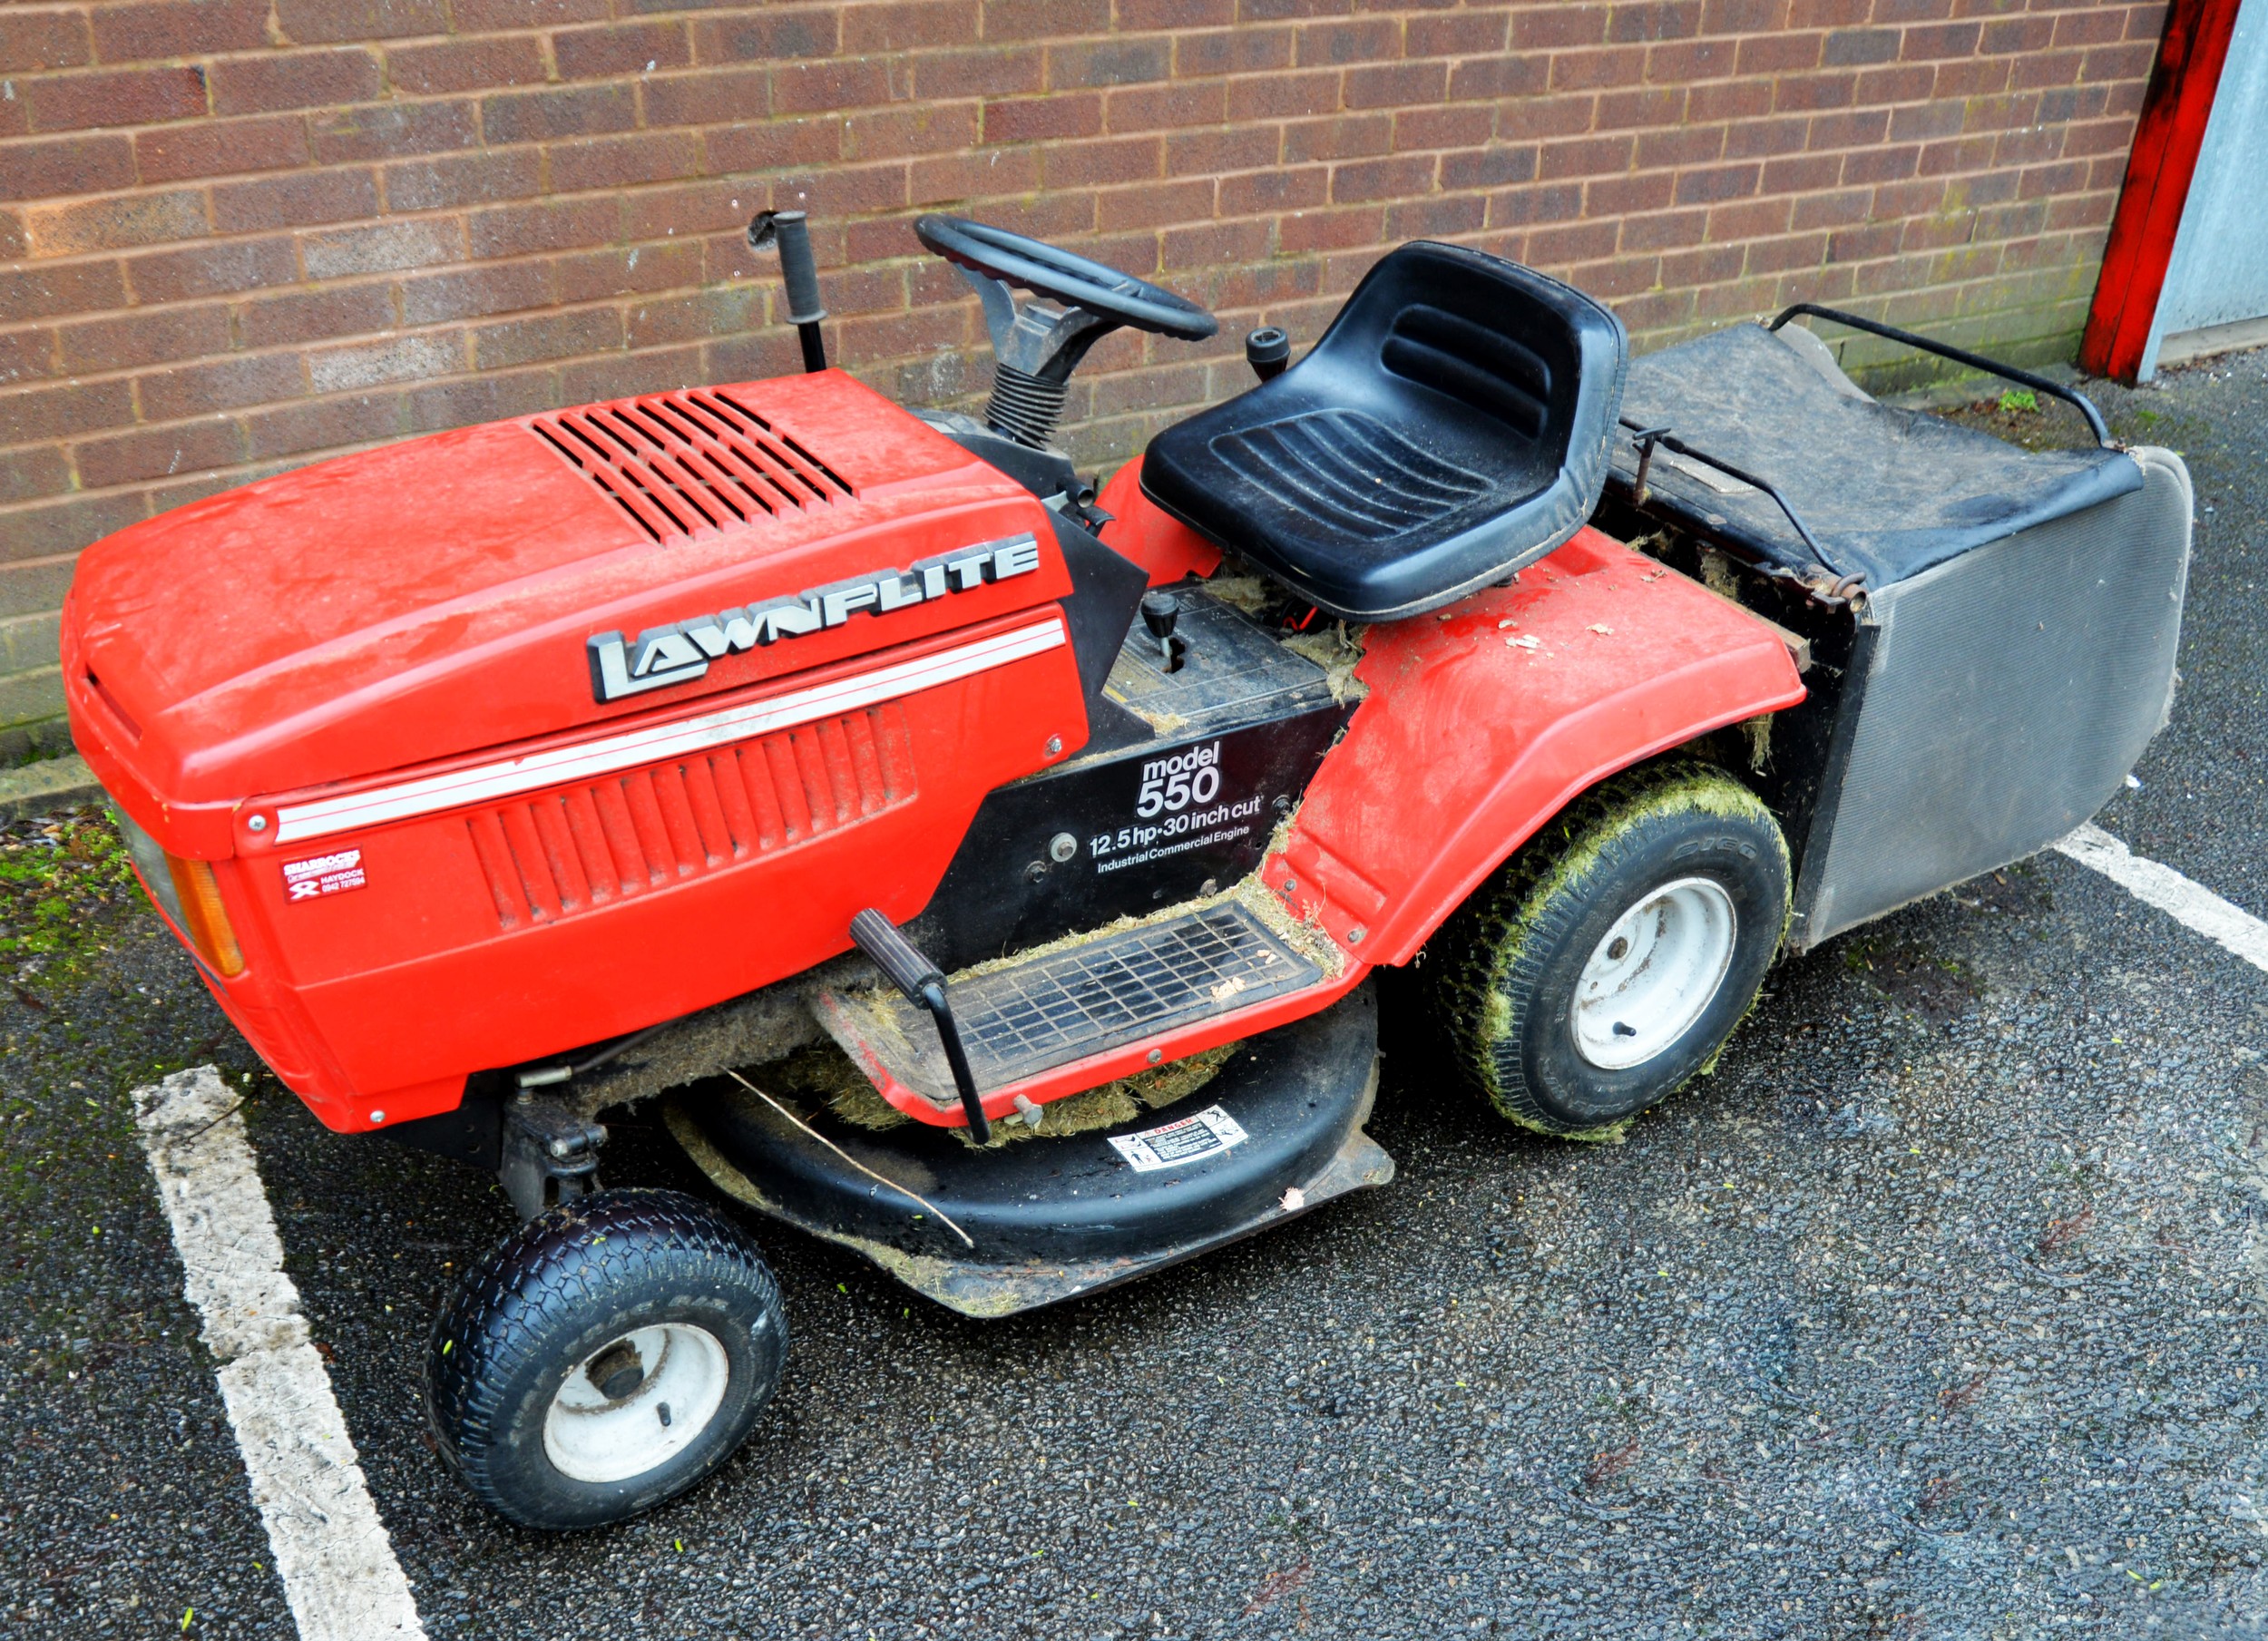 A SIT-ON LAWN MOWER, LAWNFITE, MODEL 550, 12.5 HP, 30" BLADE CUT, WITH KEY AND MANUALS - Image 2 of 4